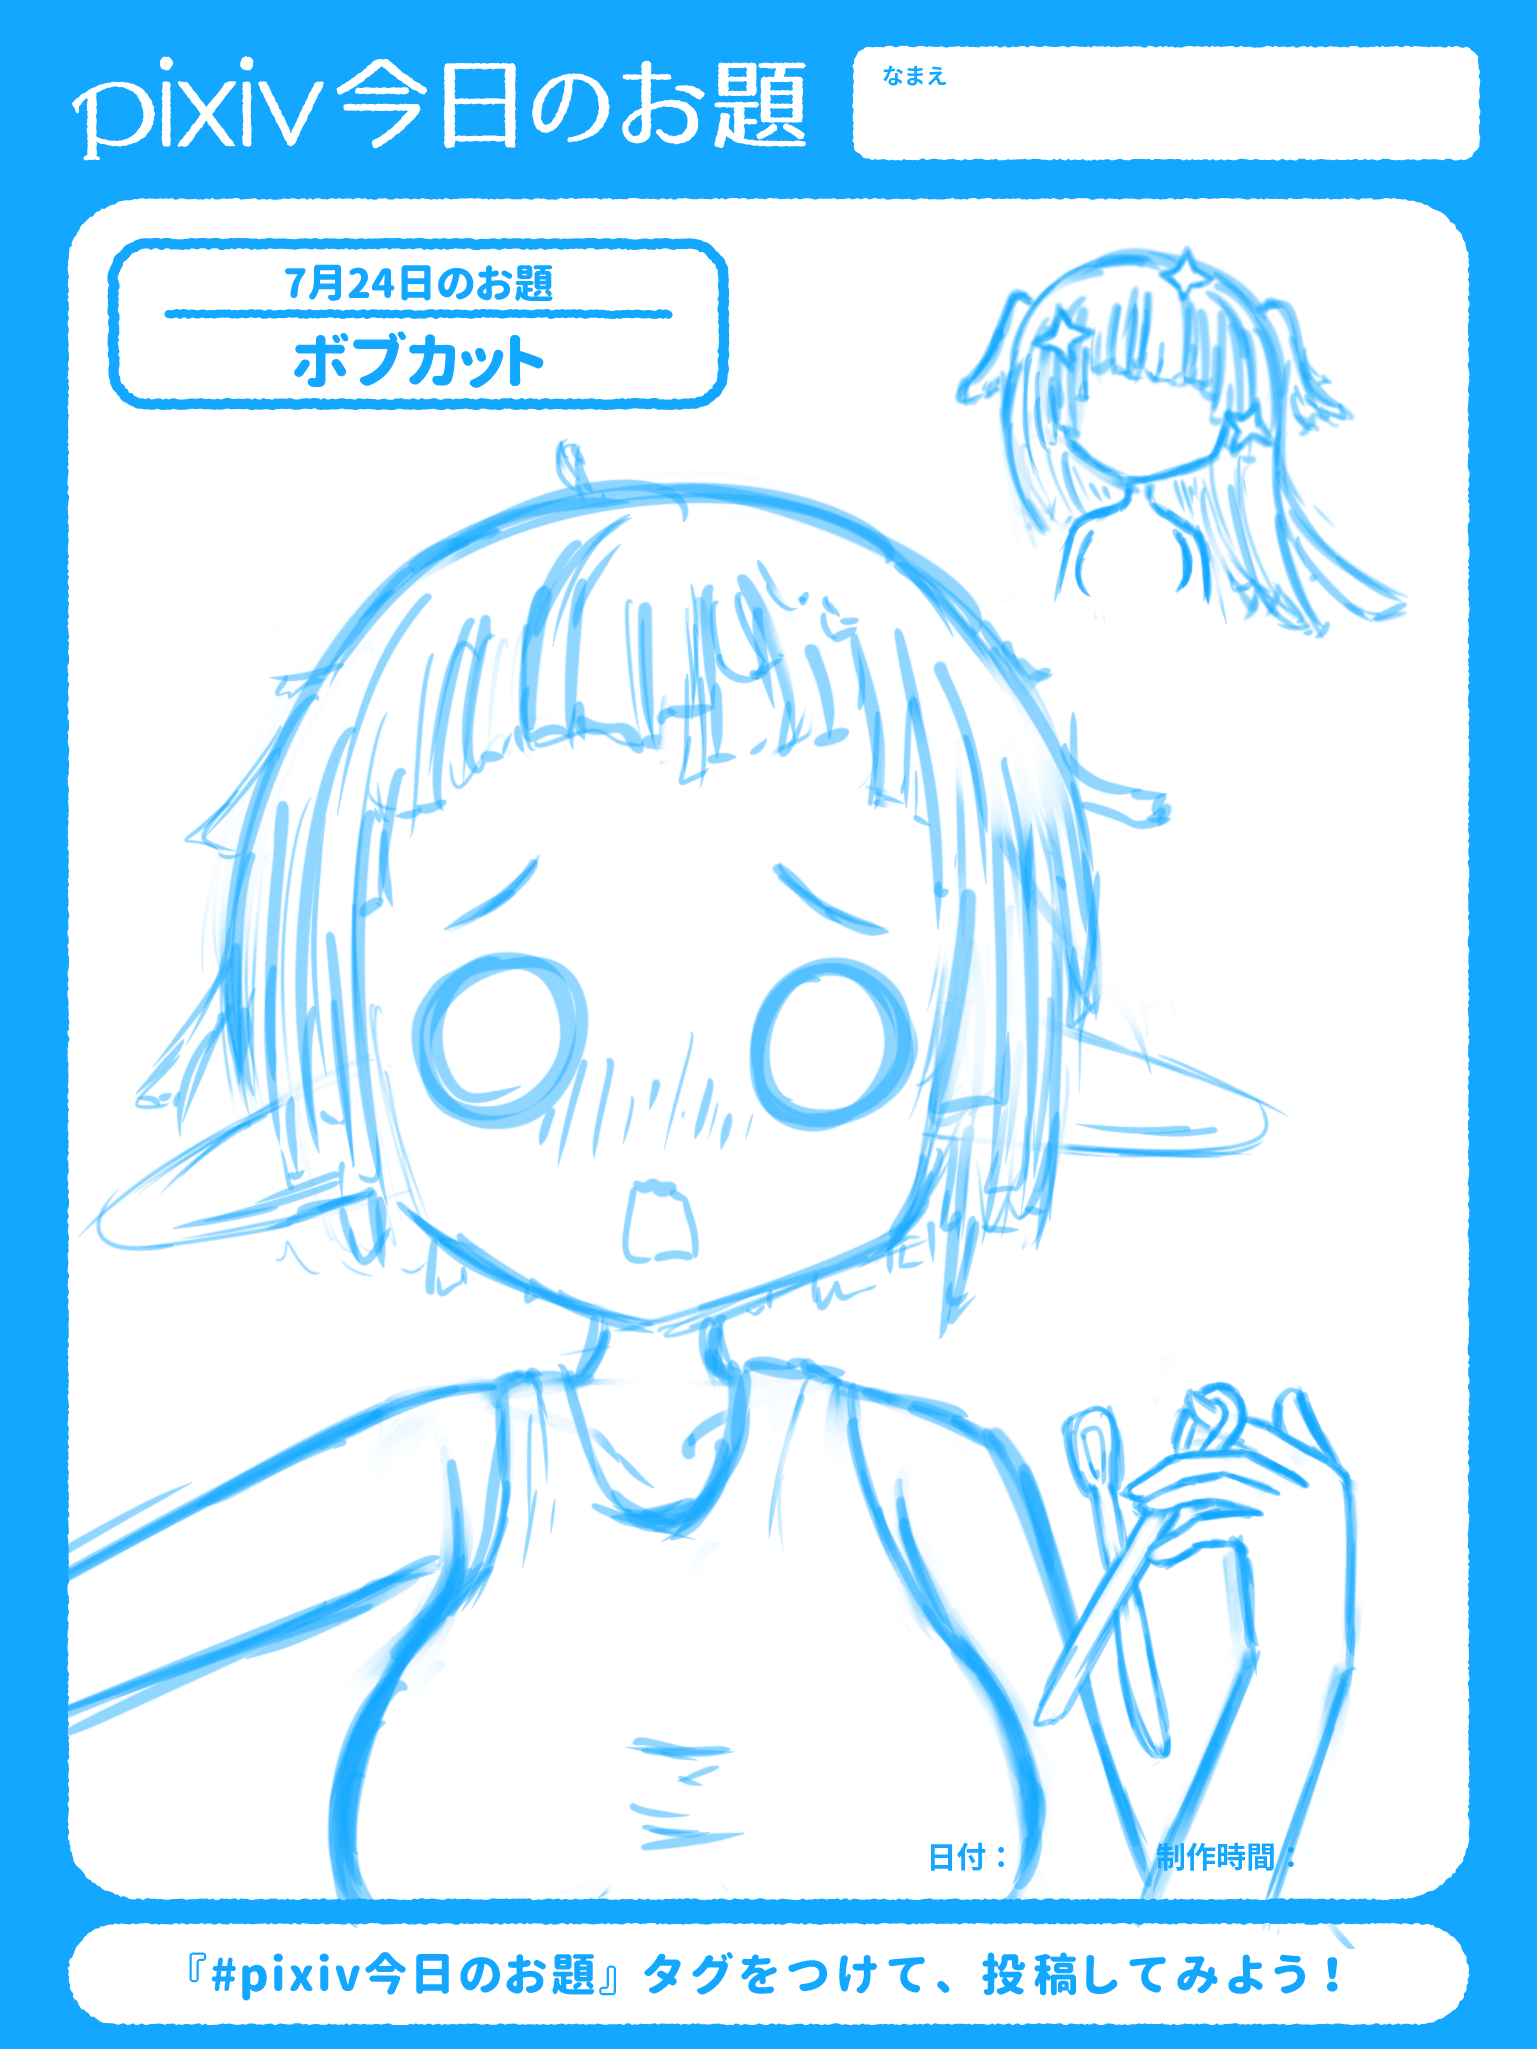 A Pixiv Sketch with the theme “bob cut.” It’s a sketch of me with very short, unevenly cut hair. I’m holding scissors and making a shocked face. In the corner, there’s a sparkly image of a two-side-up hairstyle.